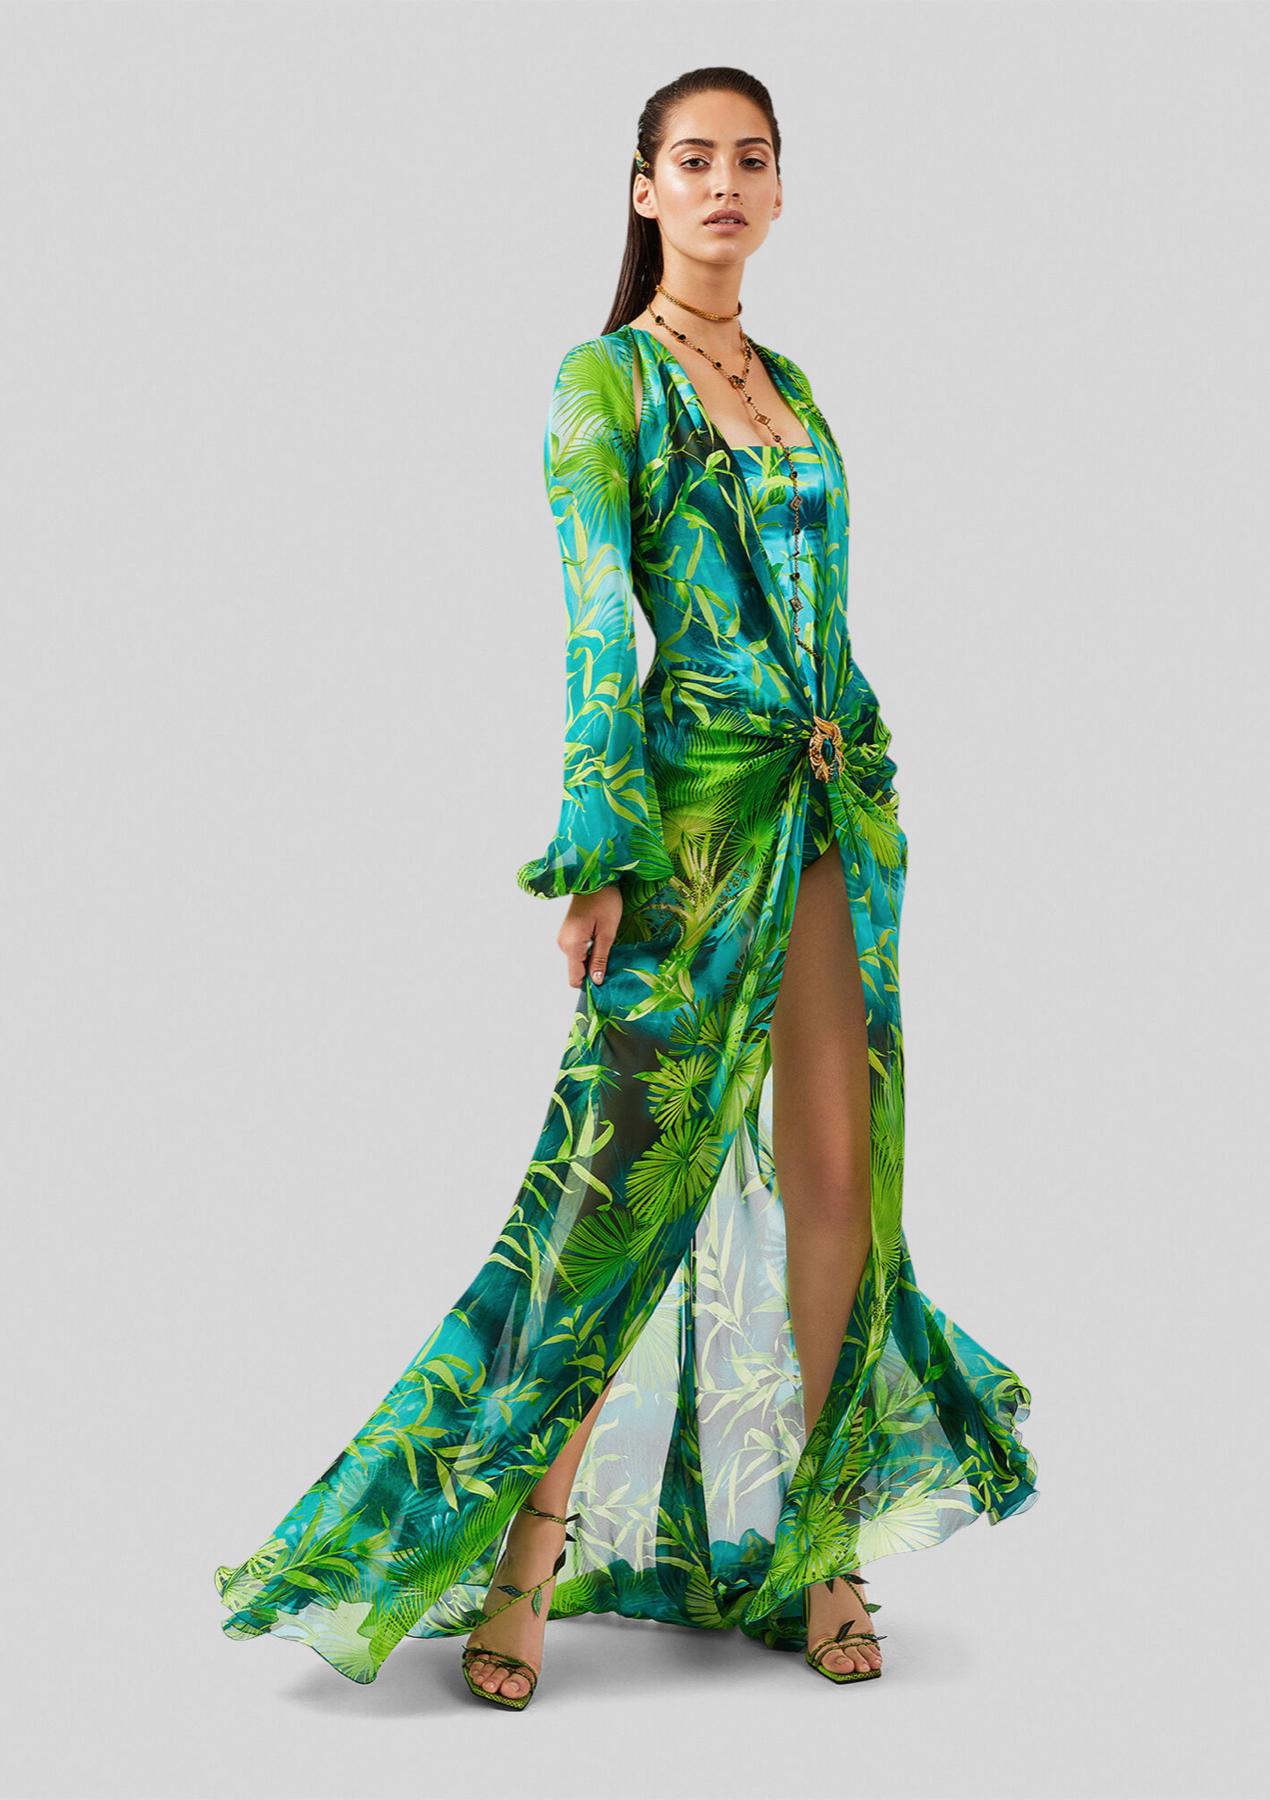 Versace Spring 2020 Green & Blue Jungle Print Floor-Length Silk Dress 

Versace's striking green and blue Jungle print dress was first worn by Jennifer Lopez at the 42nd Grammy Awards in 2000 (which broke the internet and led to the invention of